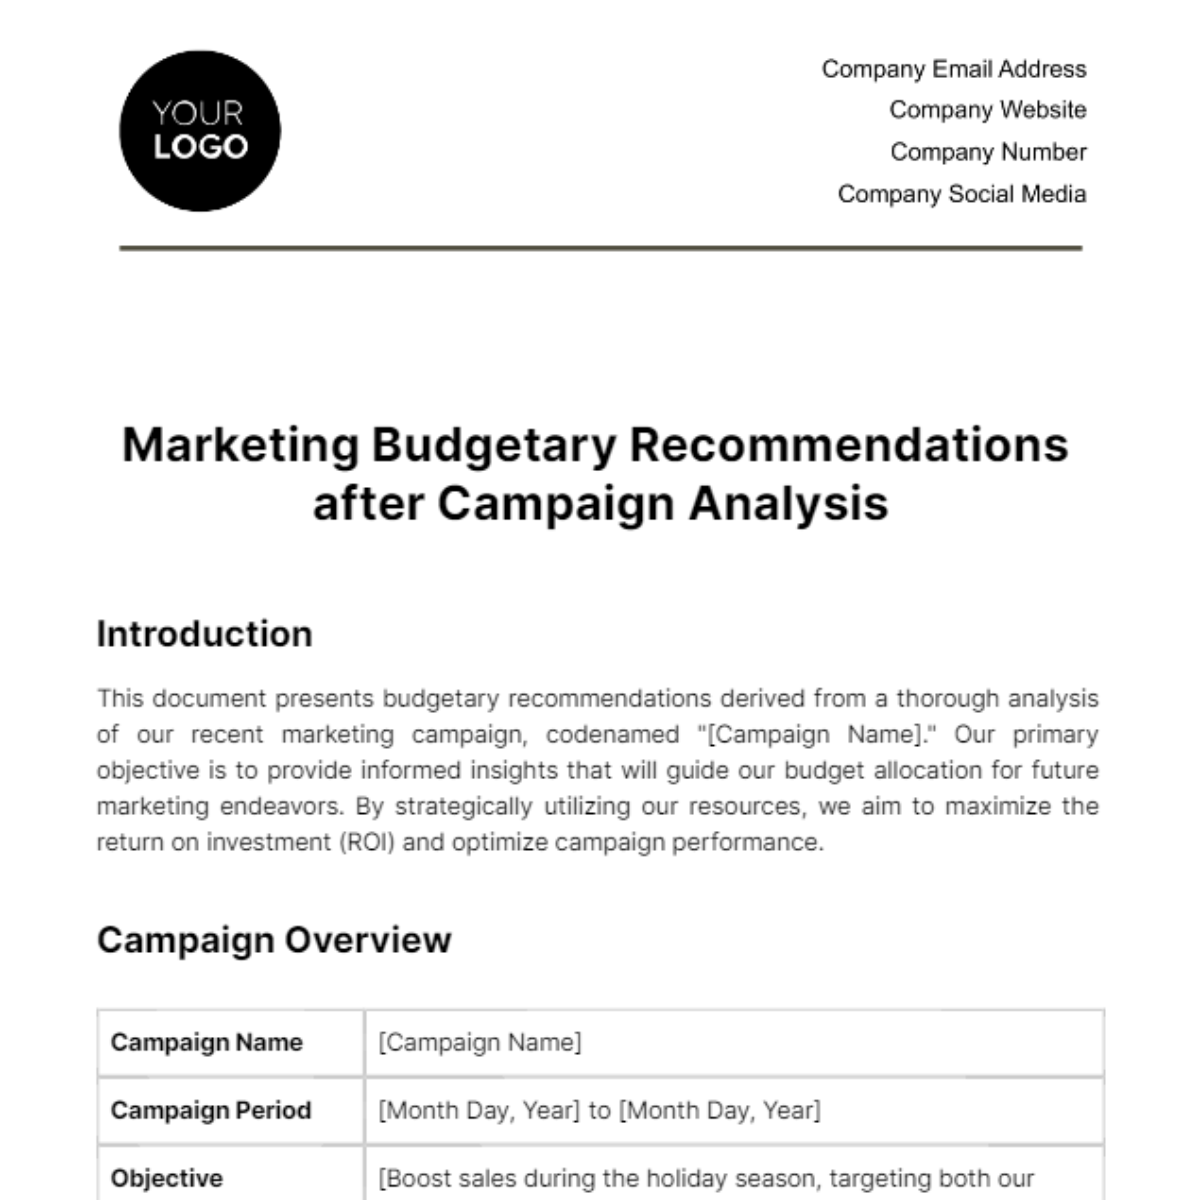 Free Marketing Budgetary Recommendations after Campaign Analysis Template